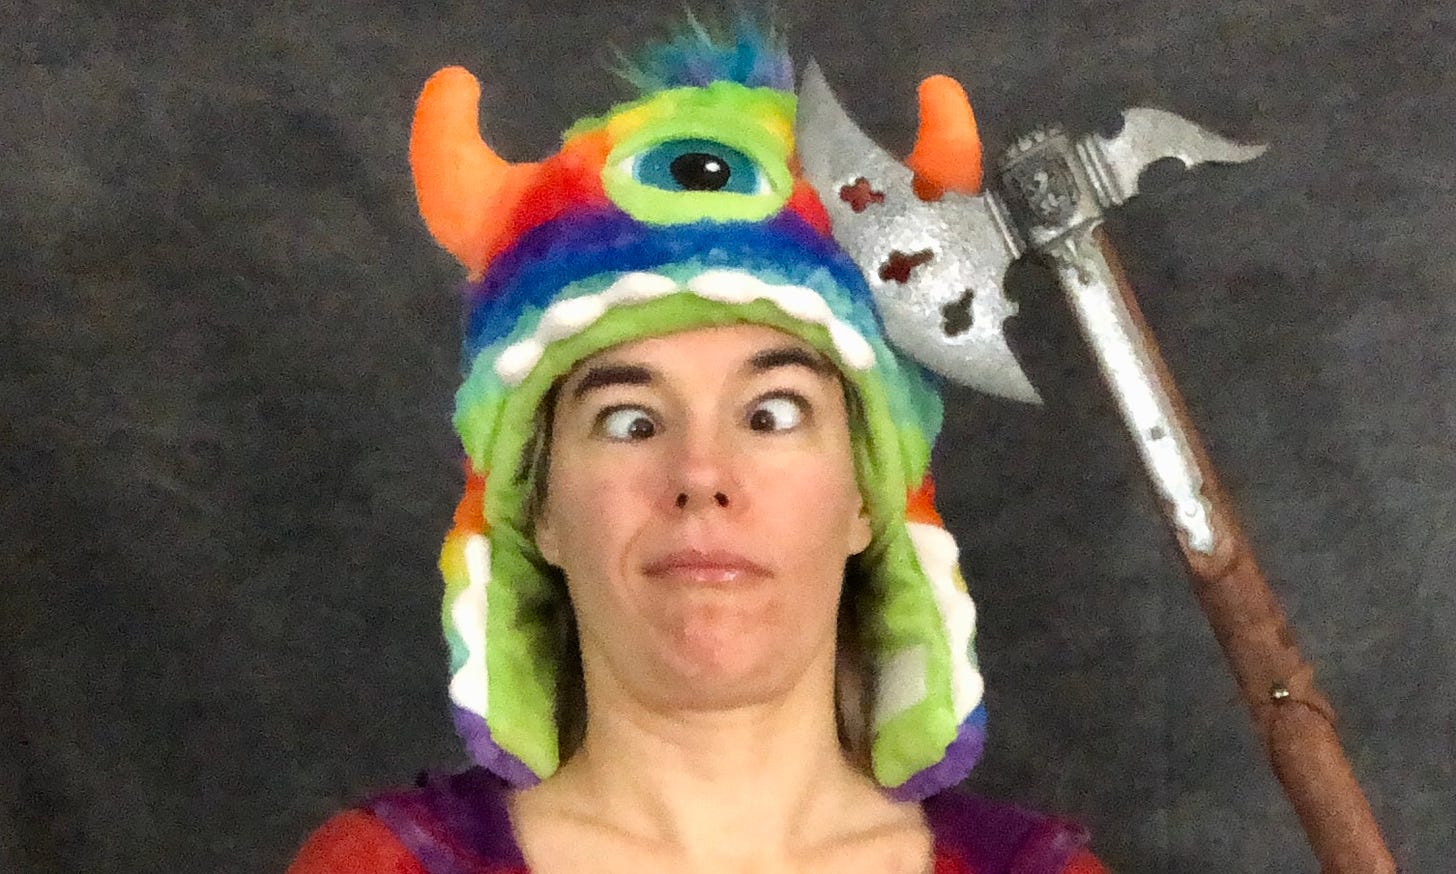 The author, cross-eyed in a rainbow monster hat with an axe alongside her head